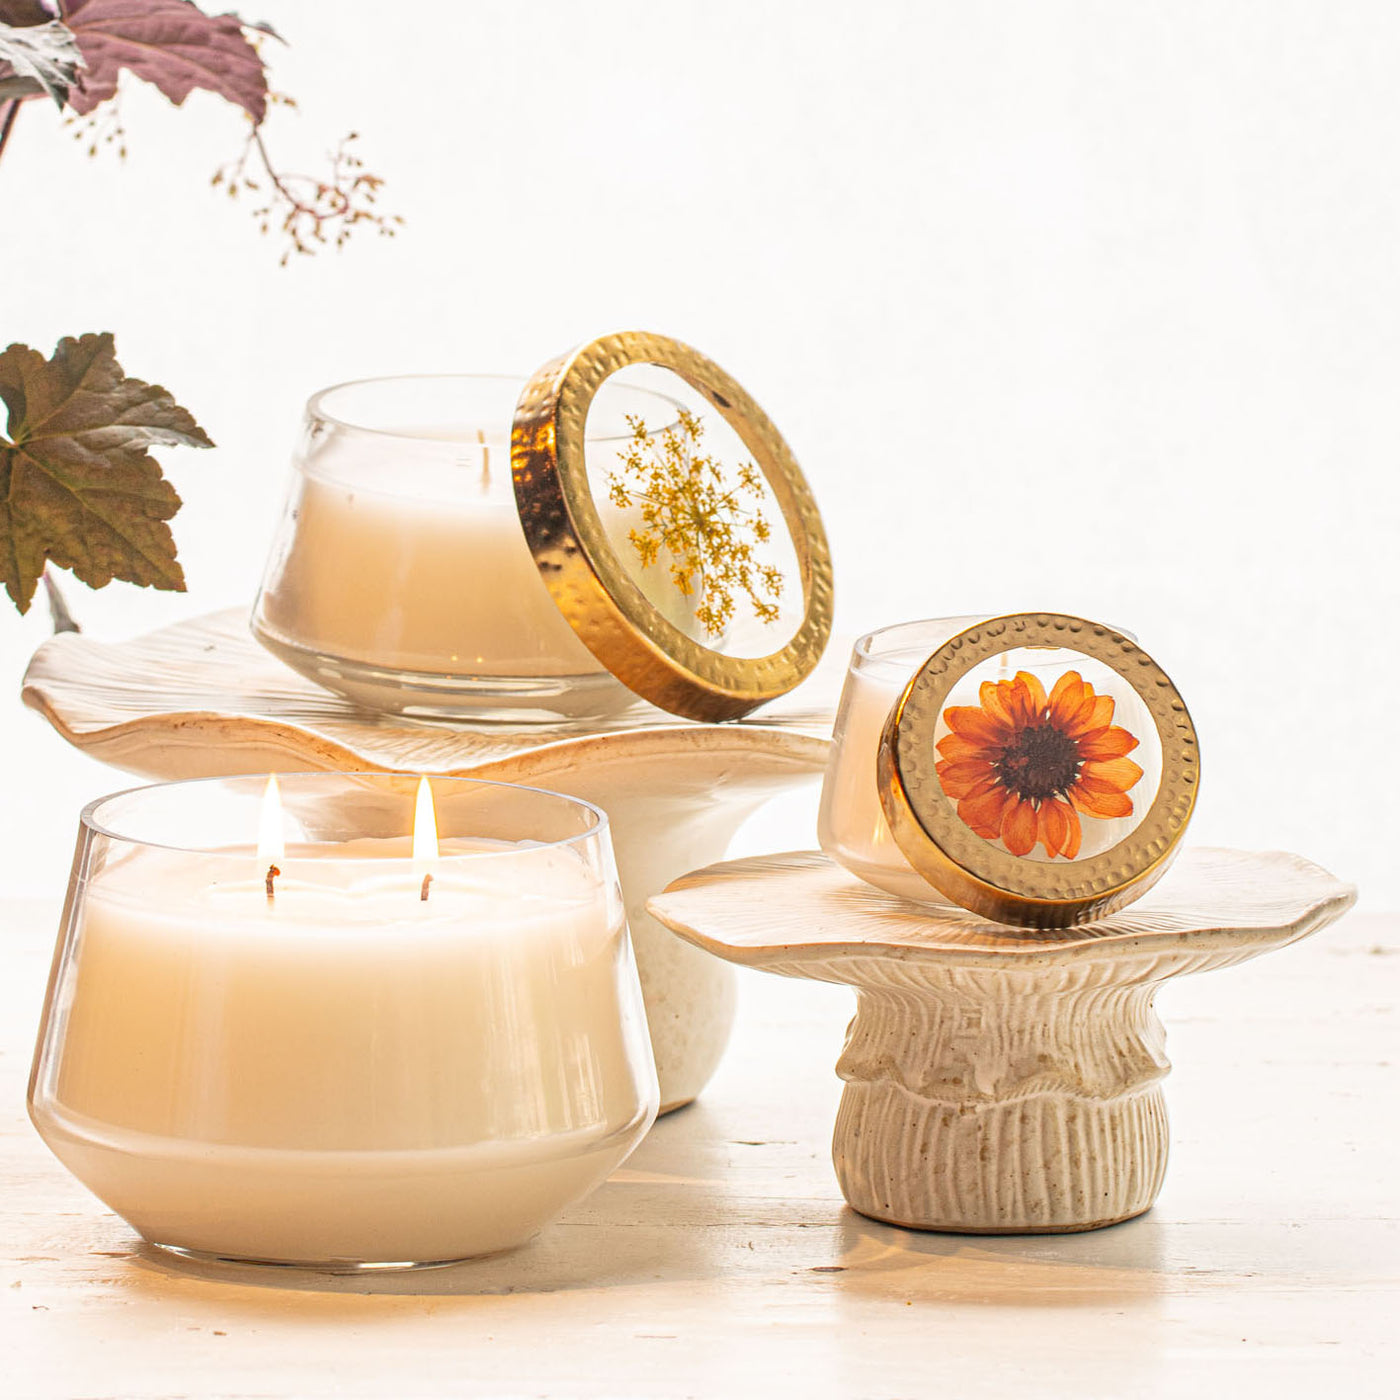 Harvest Pumpkin Small Pressed Floral Candle